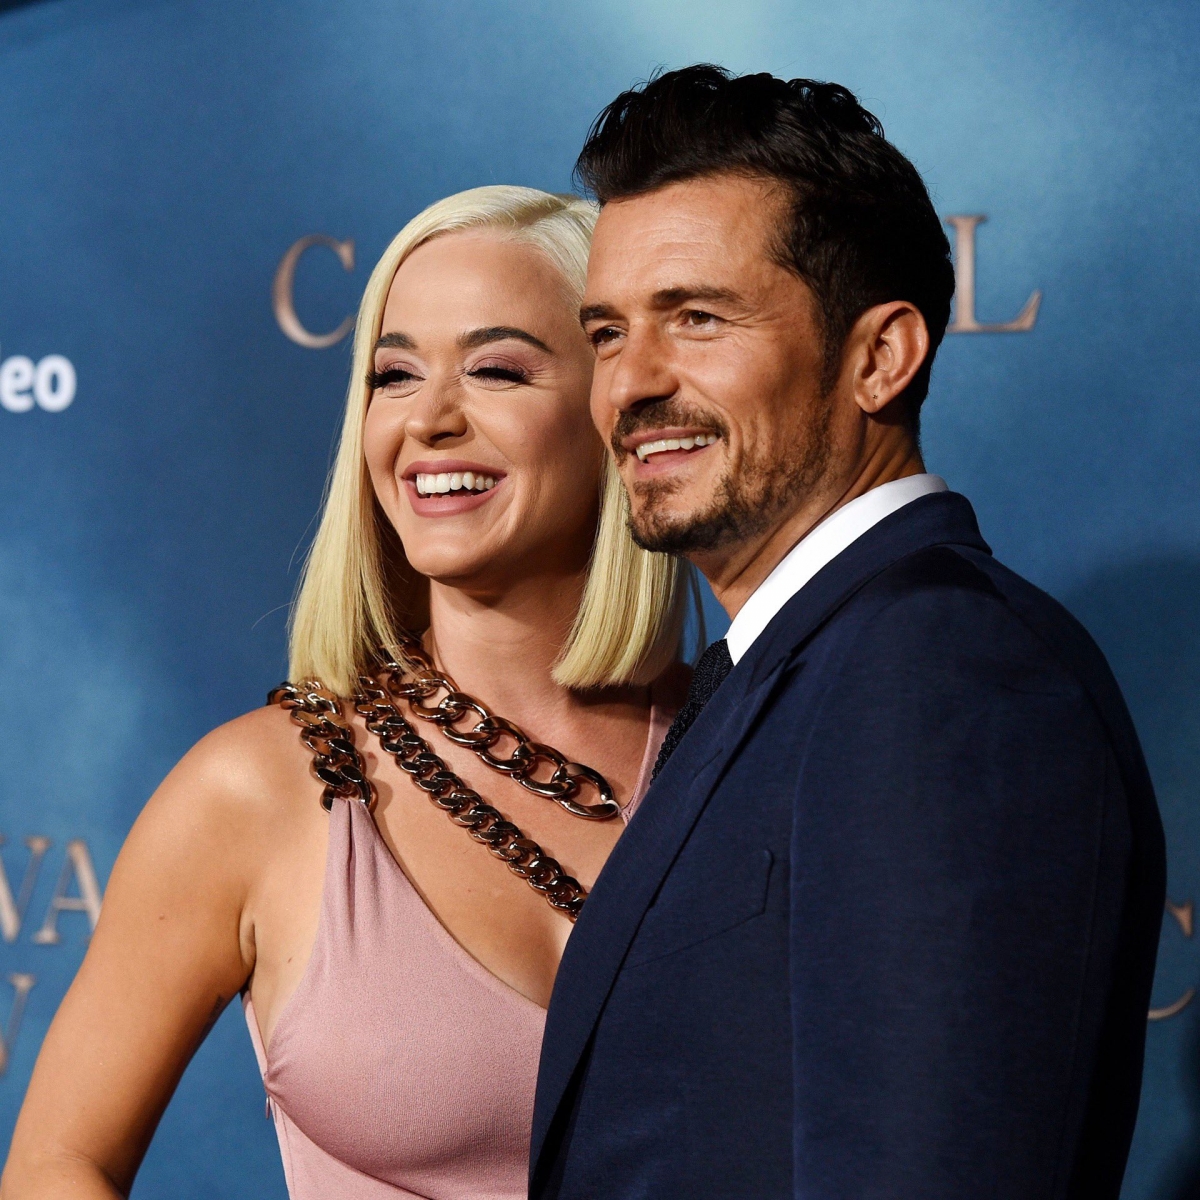 Orlando Bloom is confident that wedding with Katy Perry won't end in a